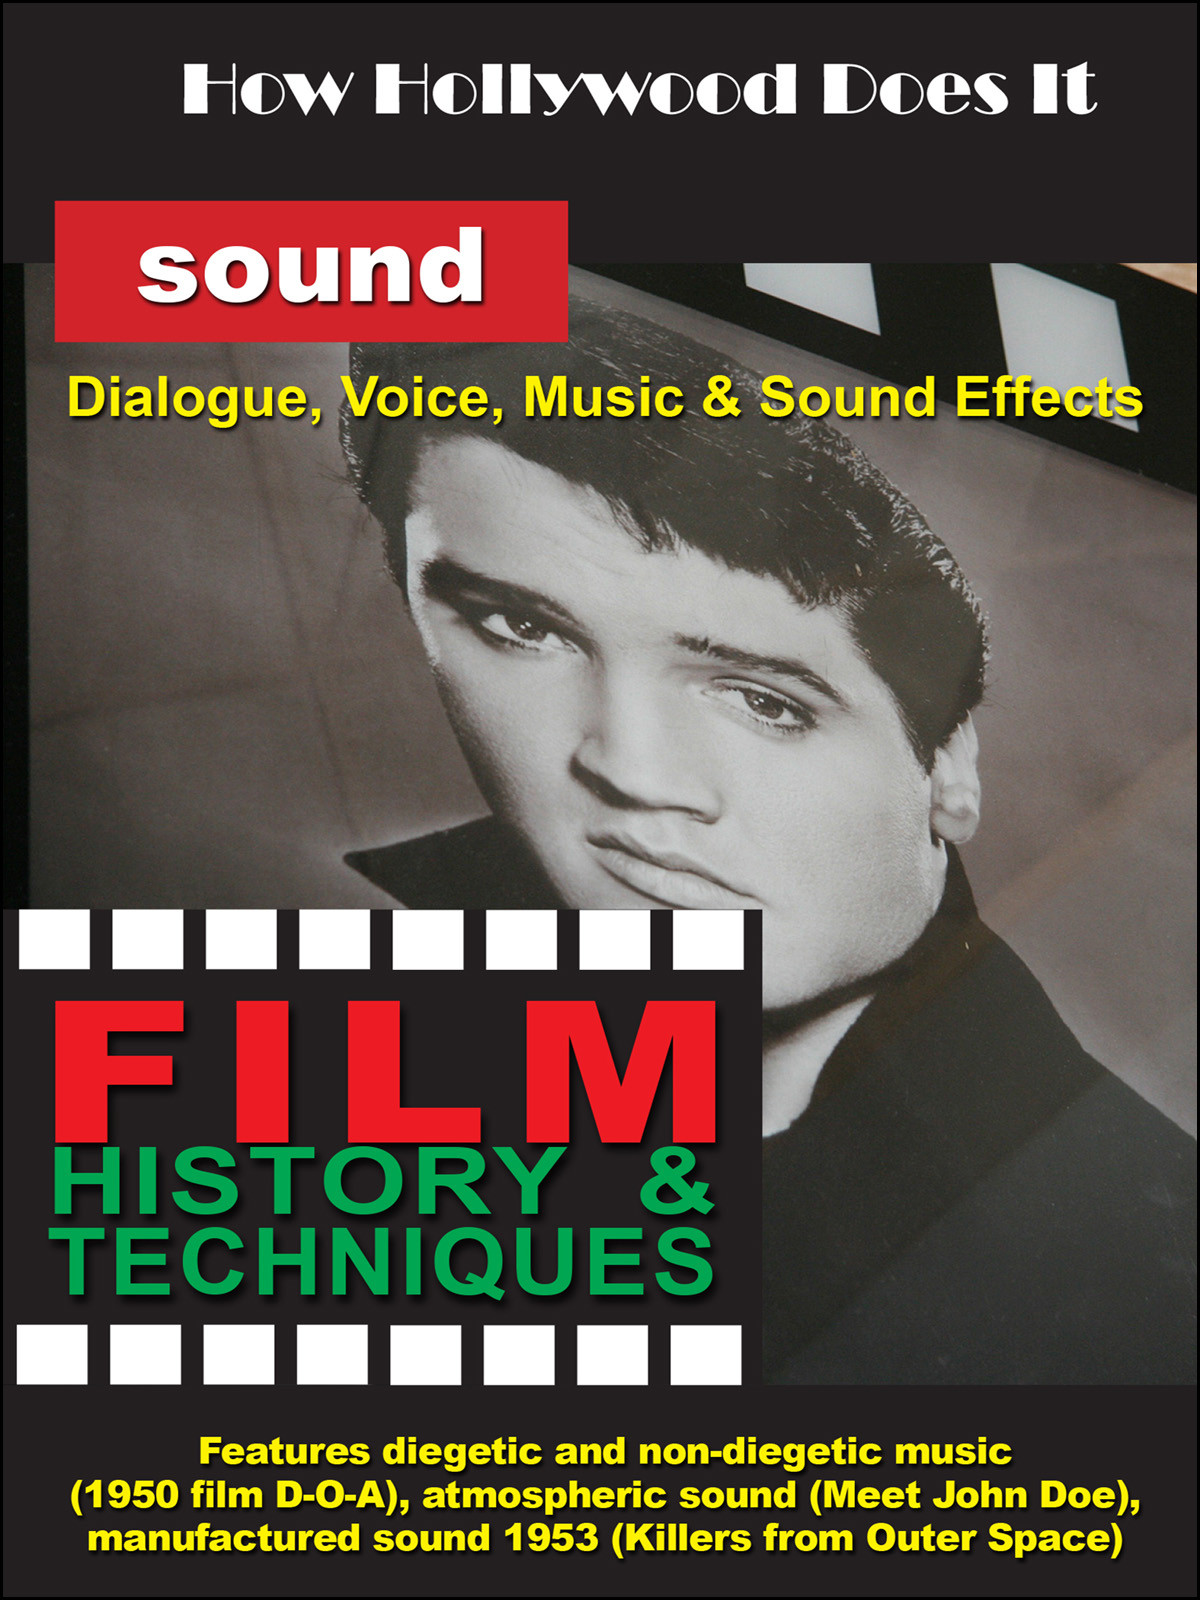 F2719 - How Hollywood Does It - Film History & Techniques of Sound